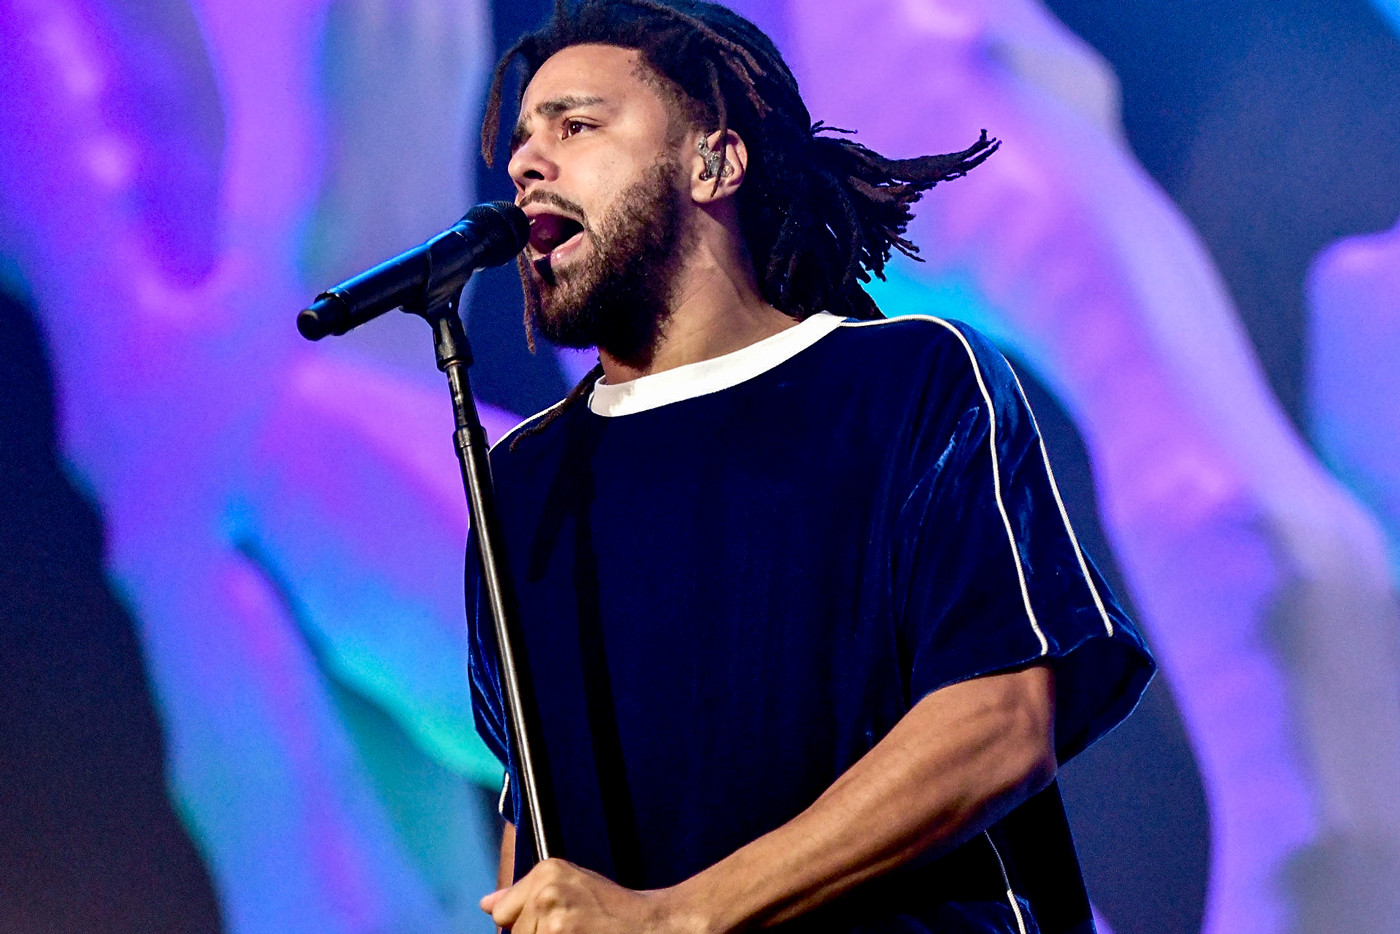 J. Cole Responds to New Song Backlash, Confirms It’s About Noname